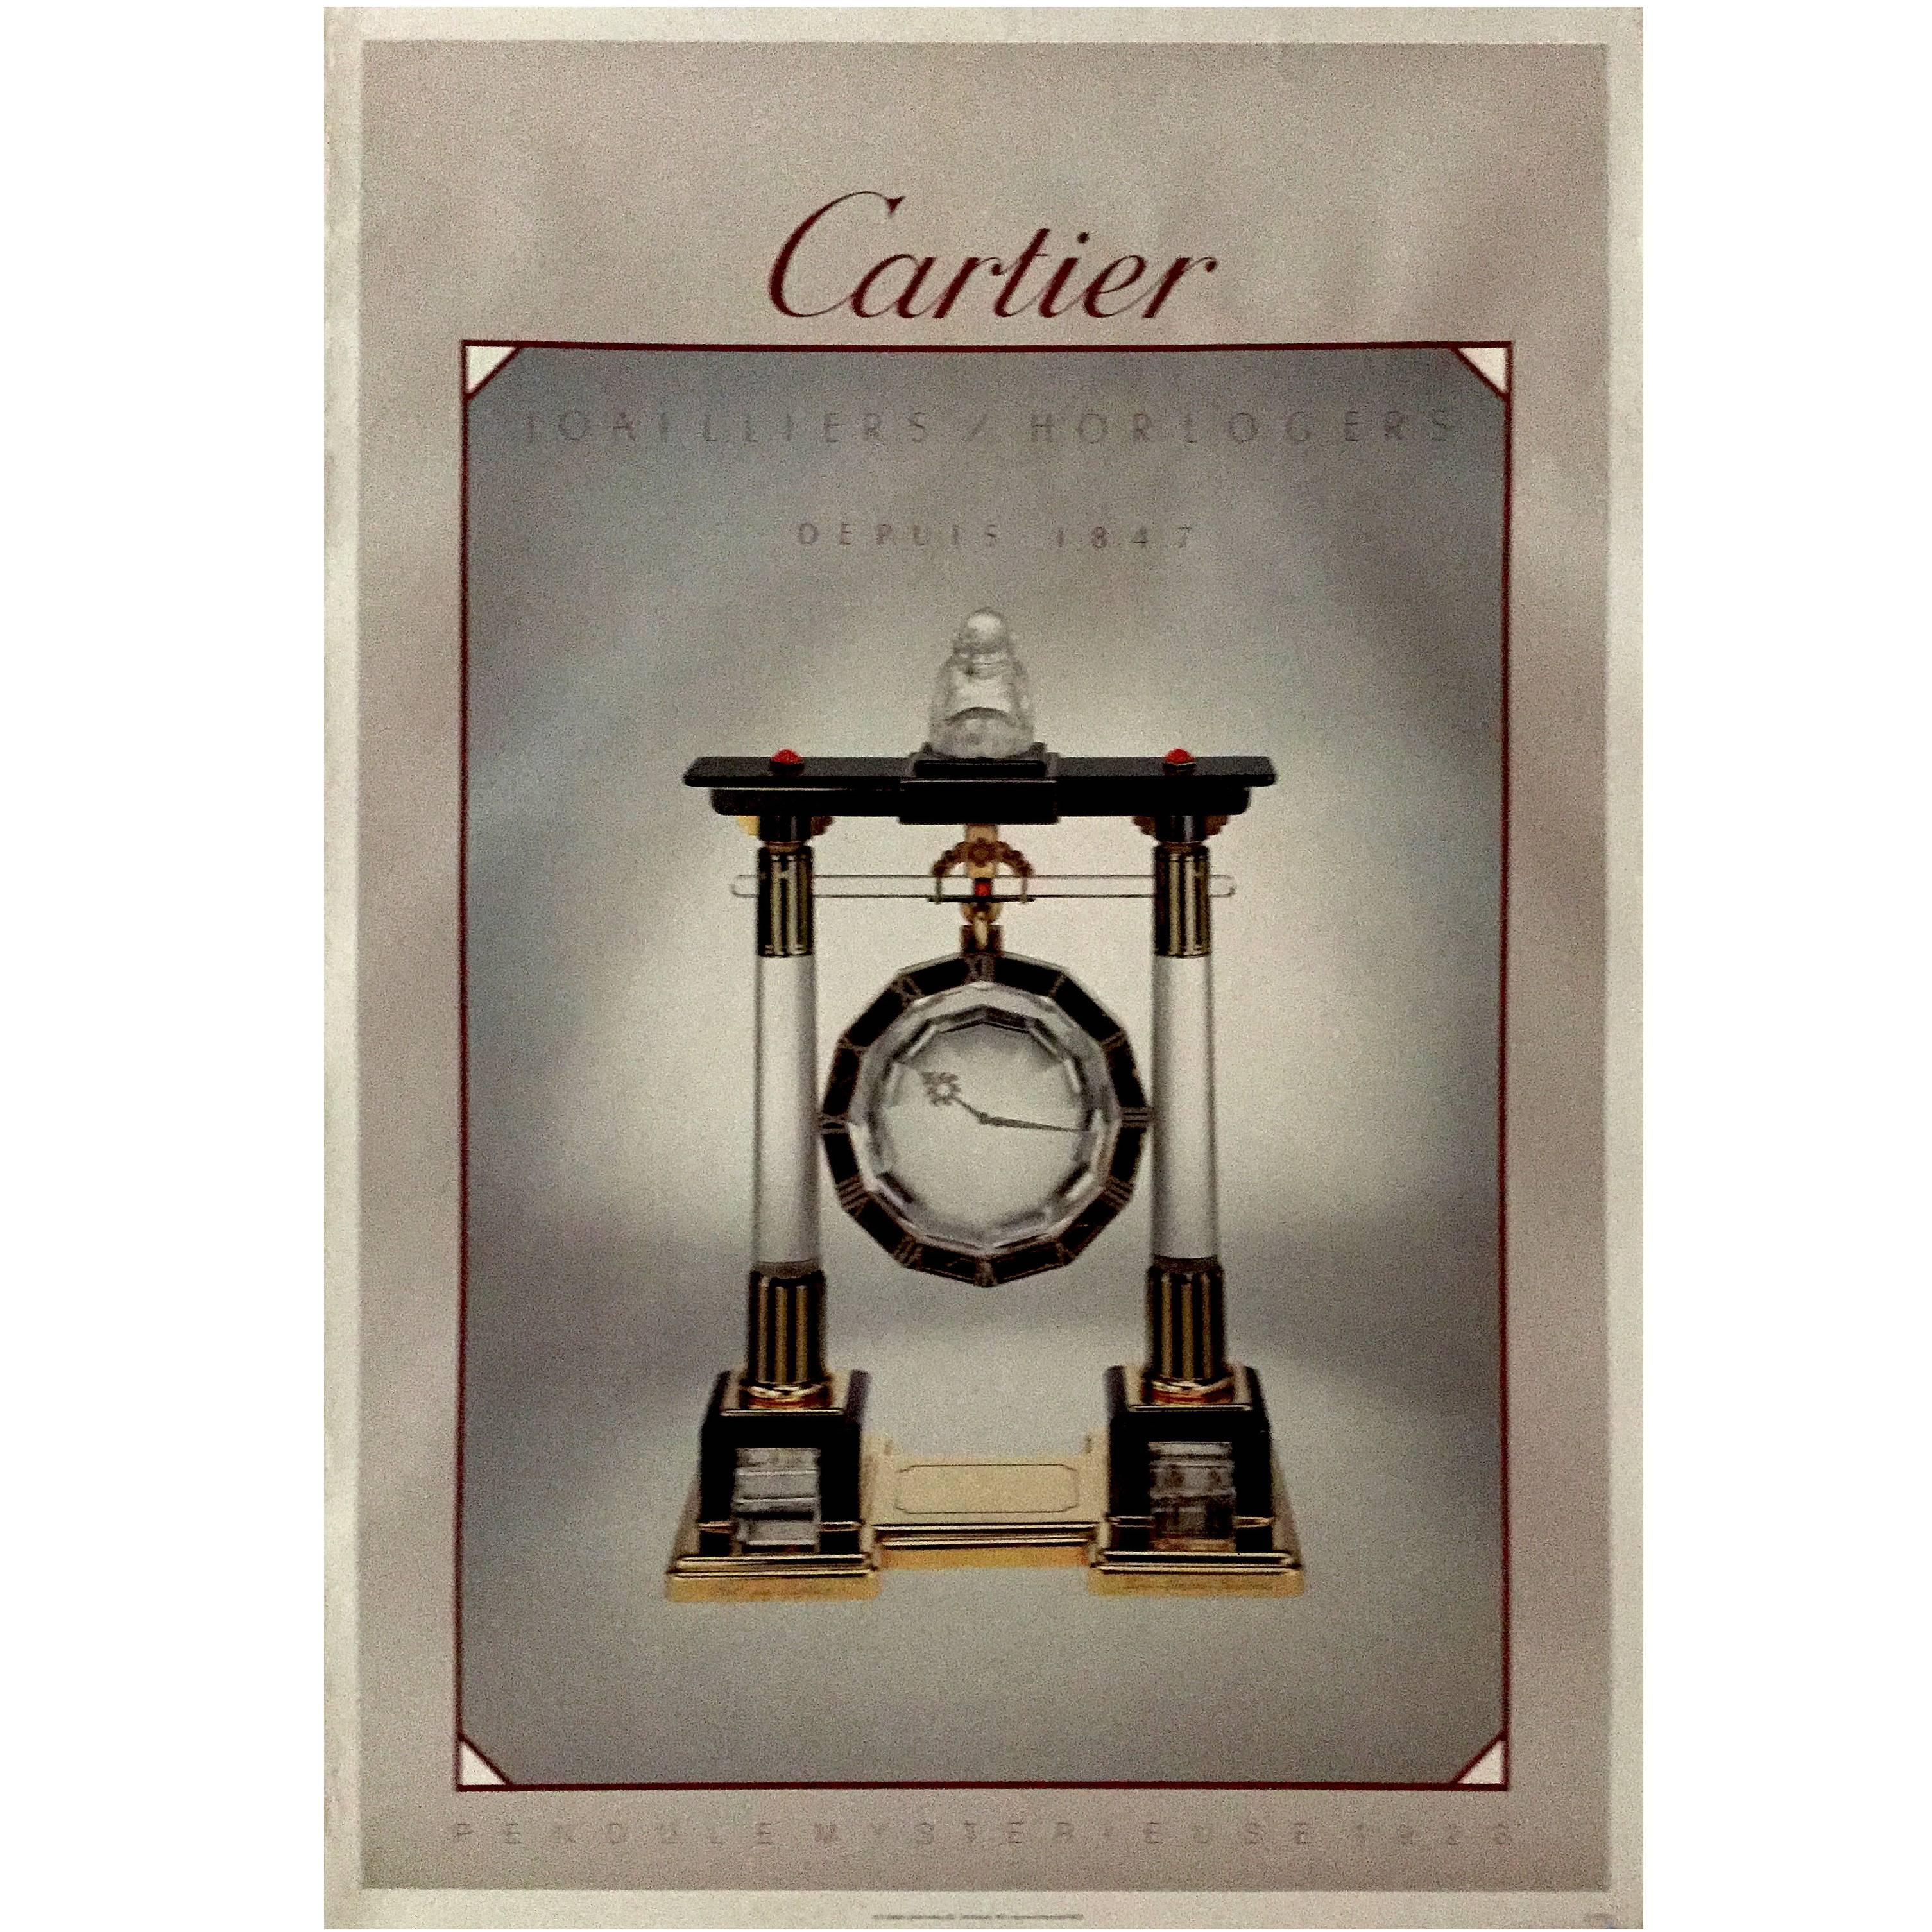 Modern Period French Original Cartier Pendulemysterieuse Poster, 1985 For Sale